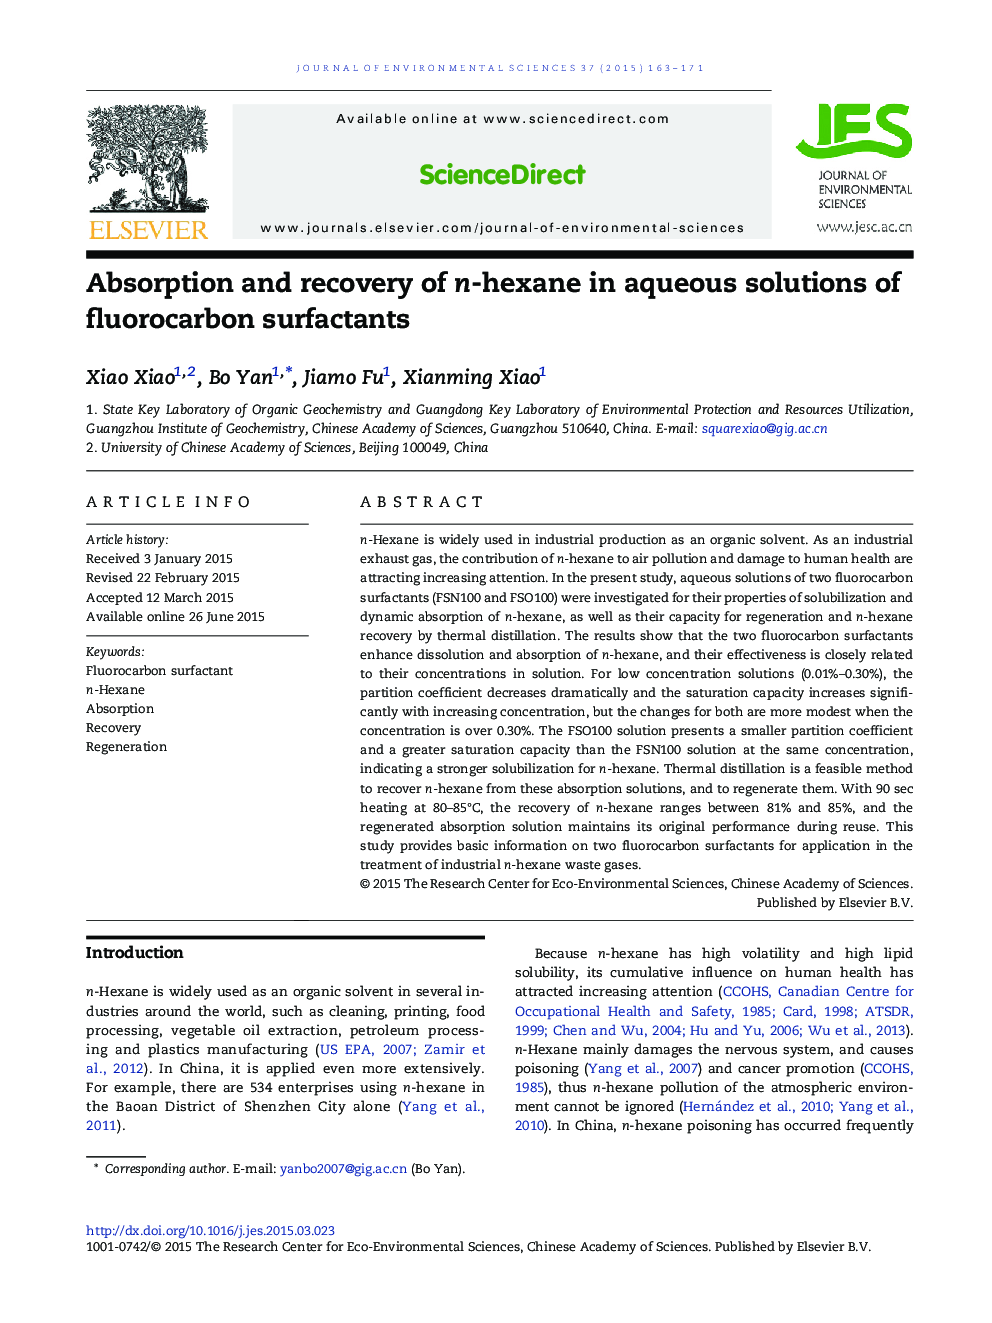 Absorption and recovery of n-hexane in aqueous solutions of fluorocarbon surfactants